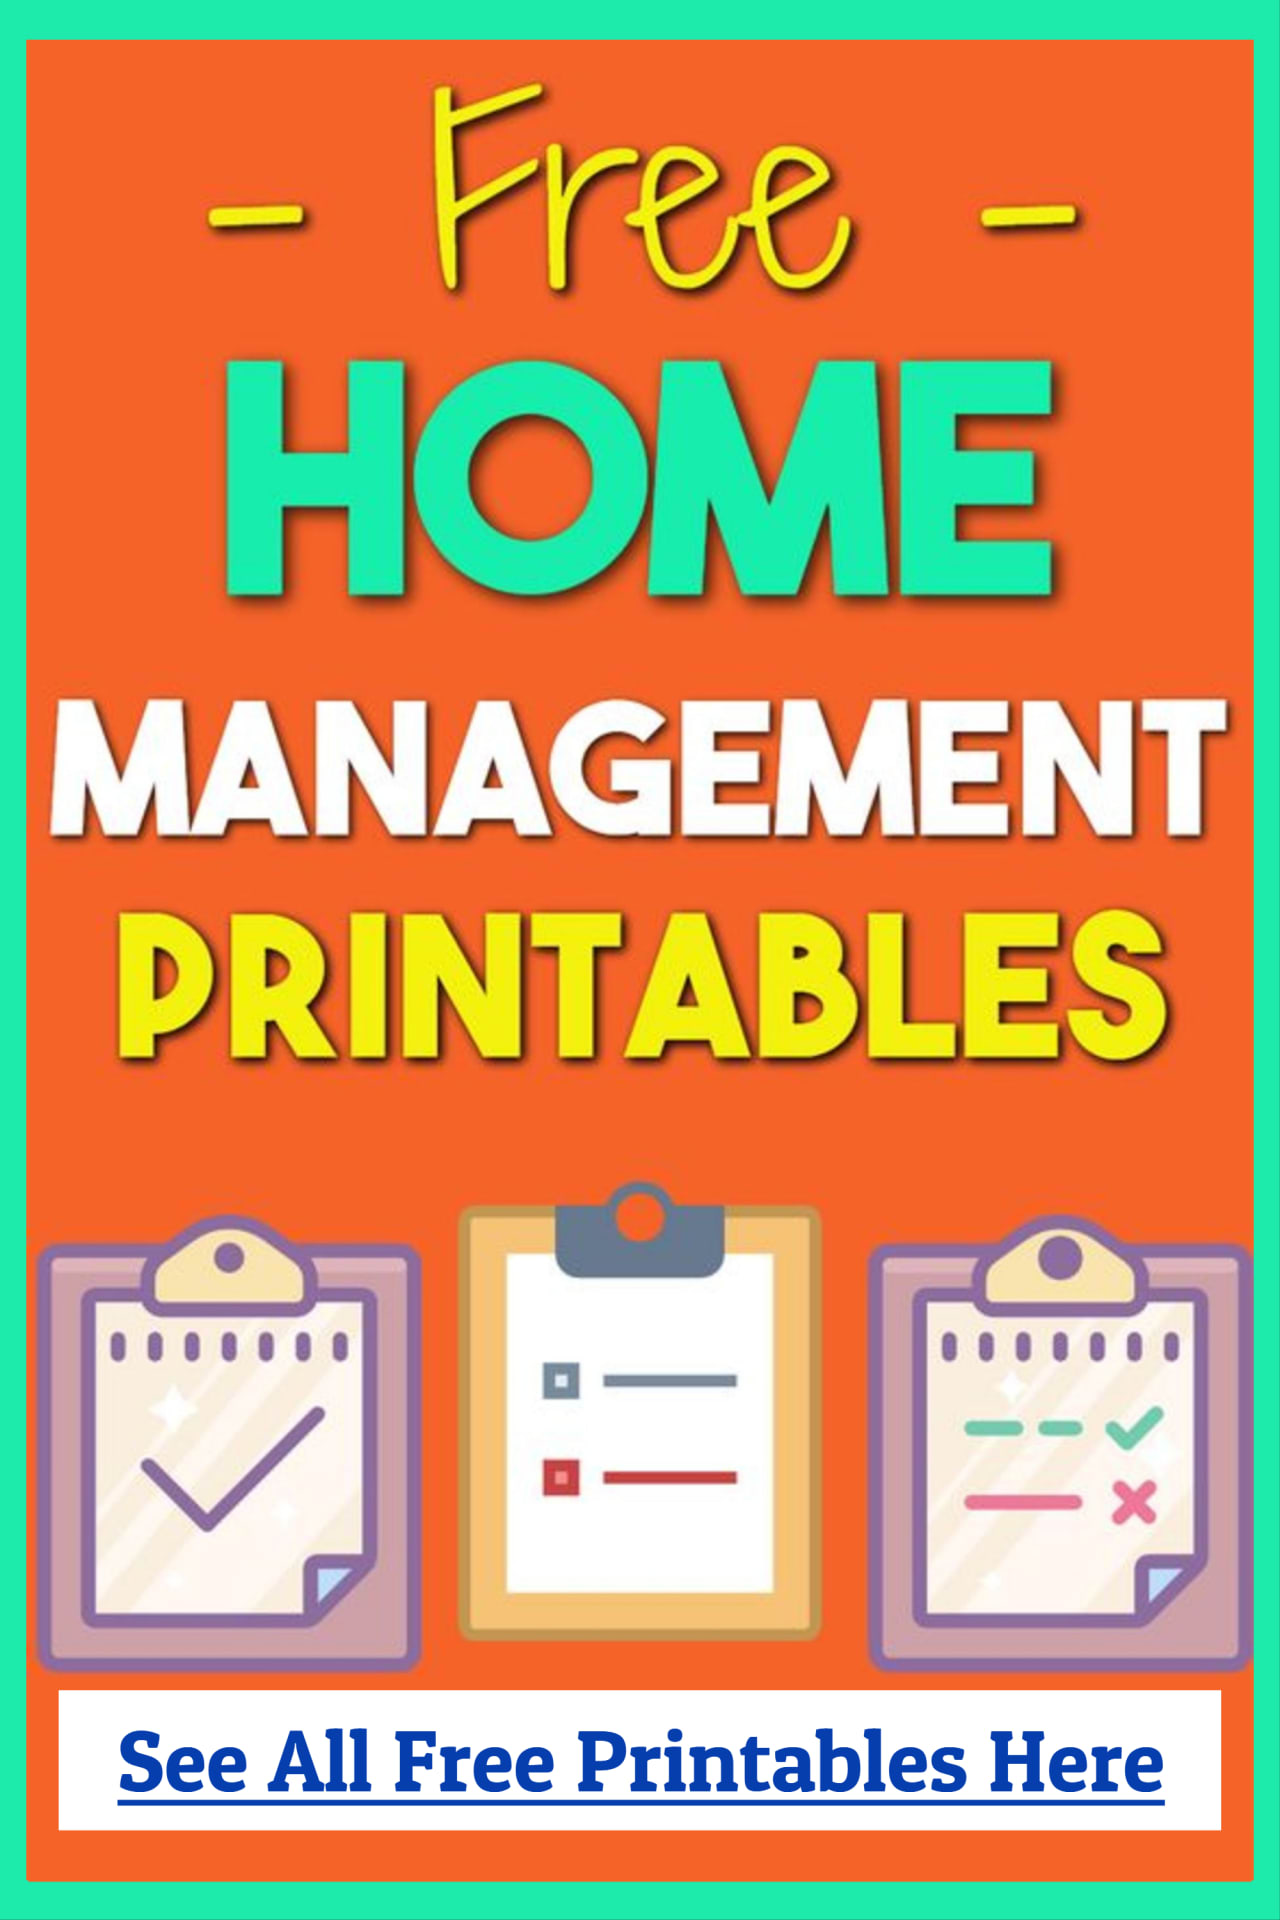 Home Management Binder Free Printables, worksheets, PDFs, logs and password keepers for your home management binder